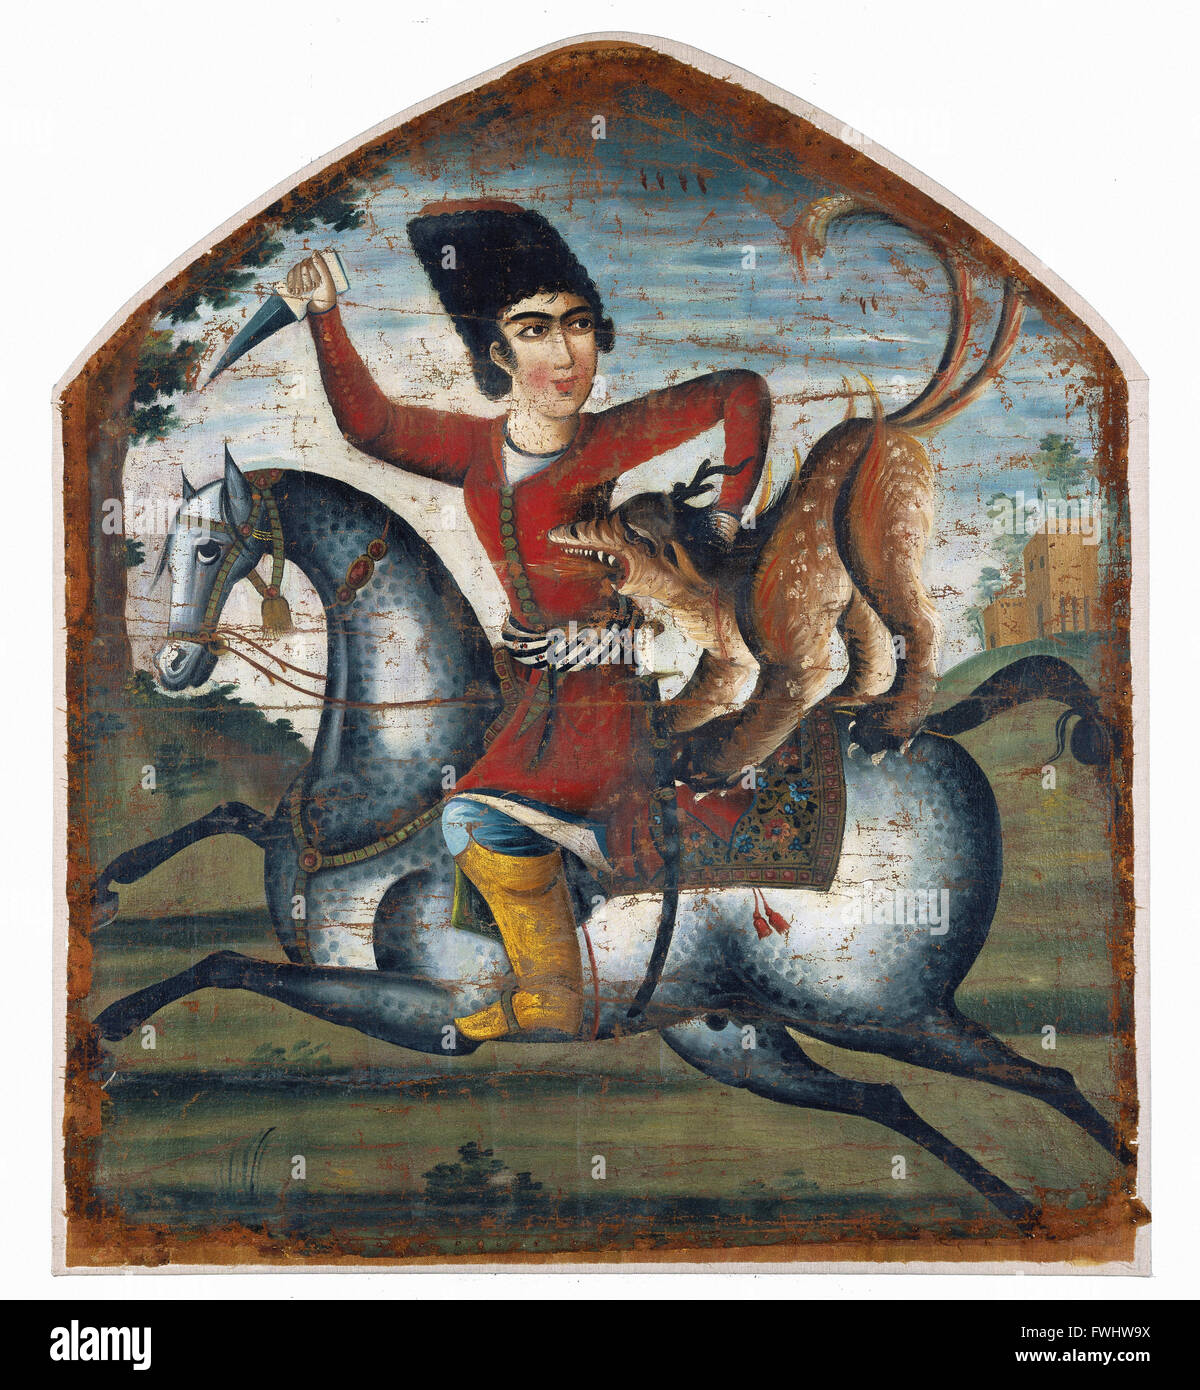 Hunter on Horseback Attacked by a Mythical Beast - Brooklyn Museum Stock Photo